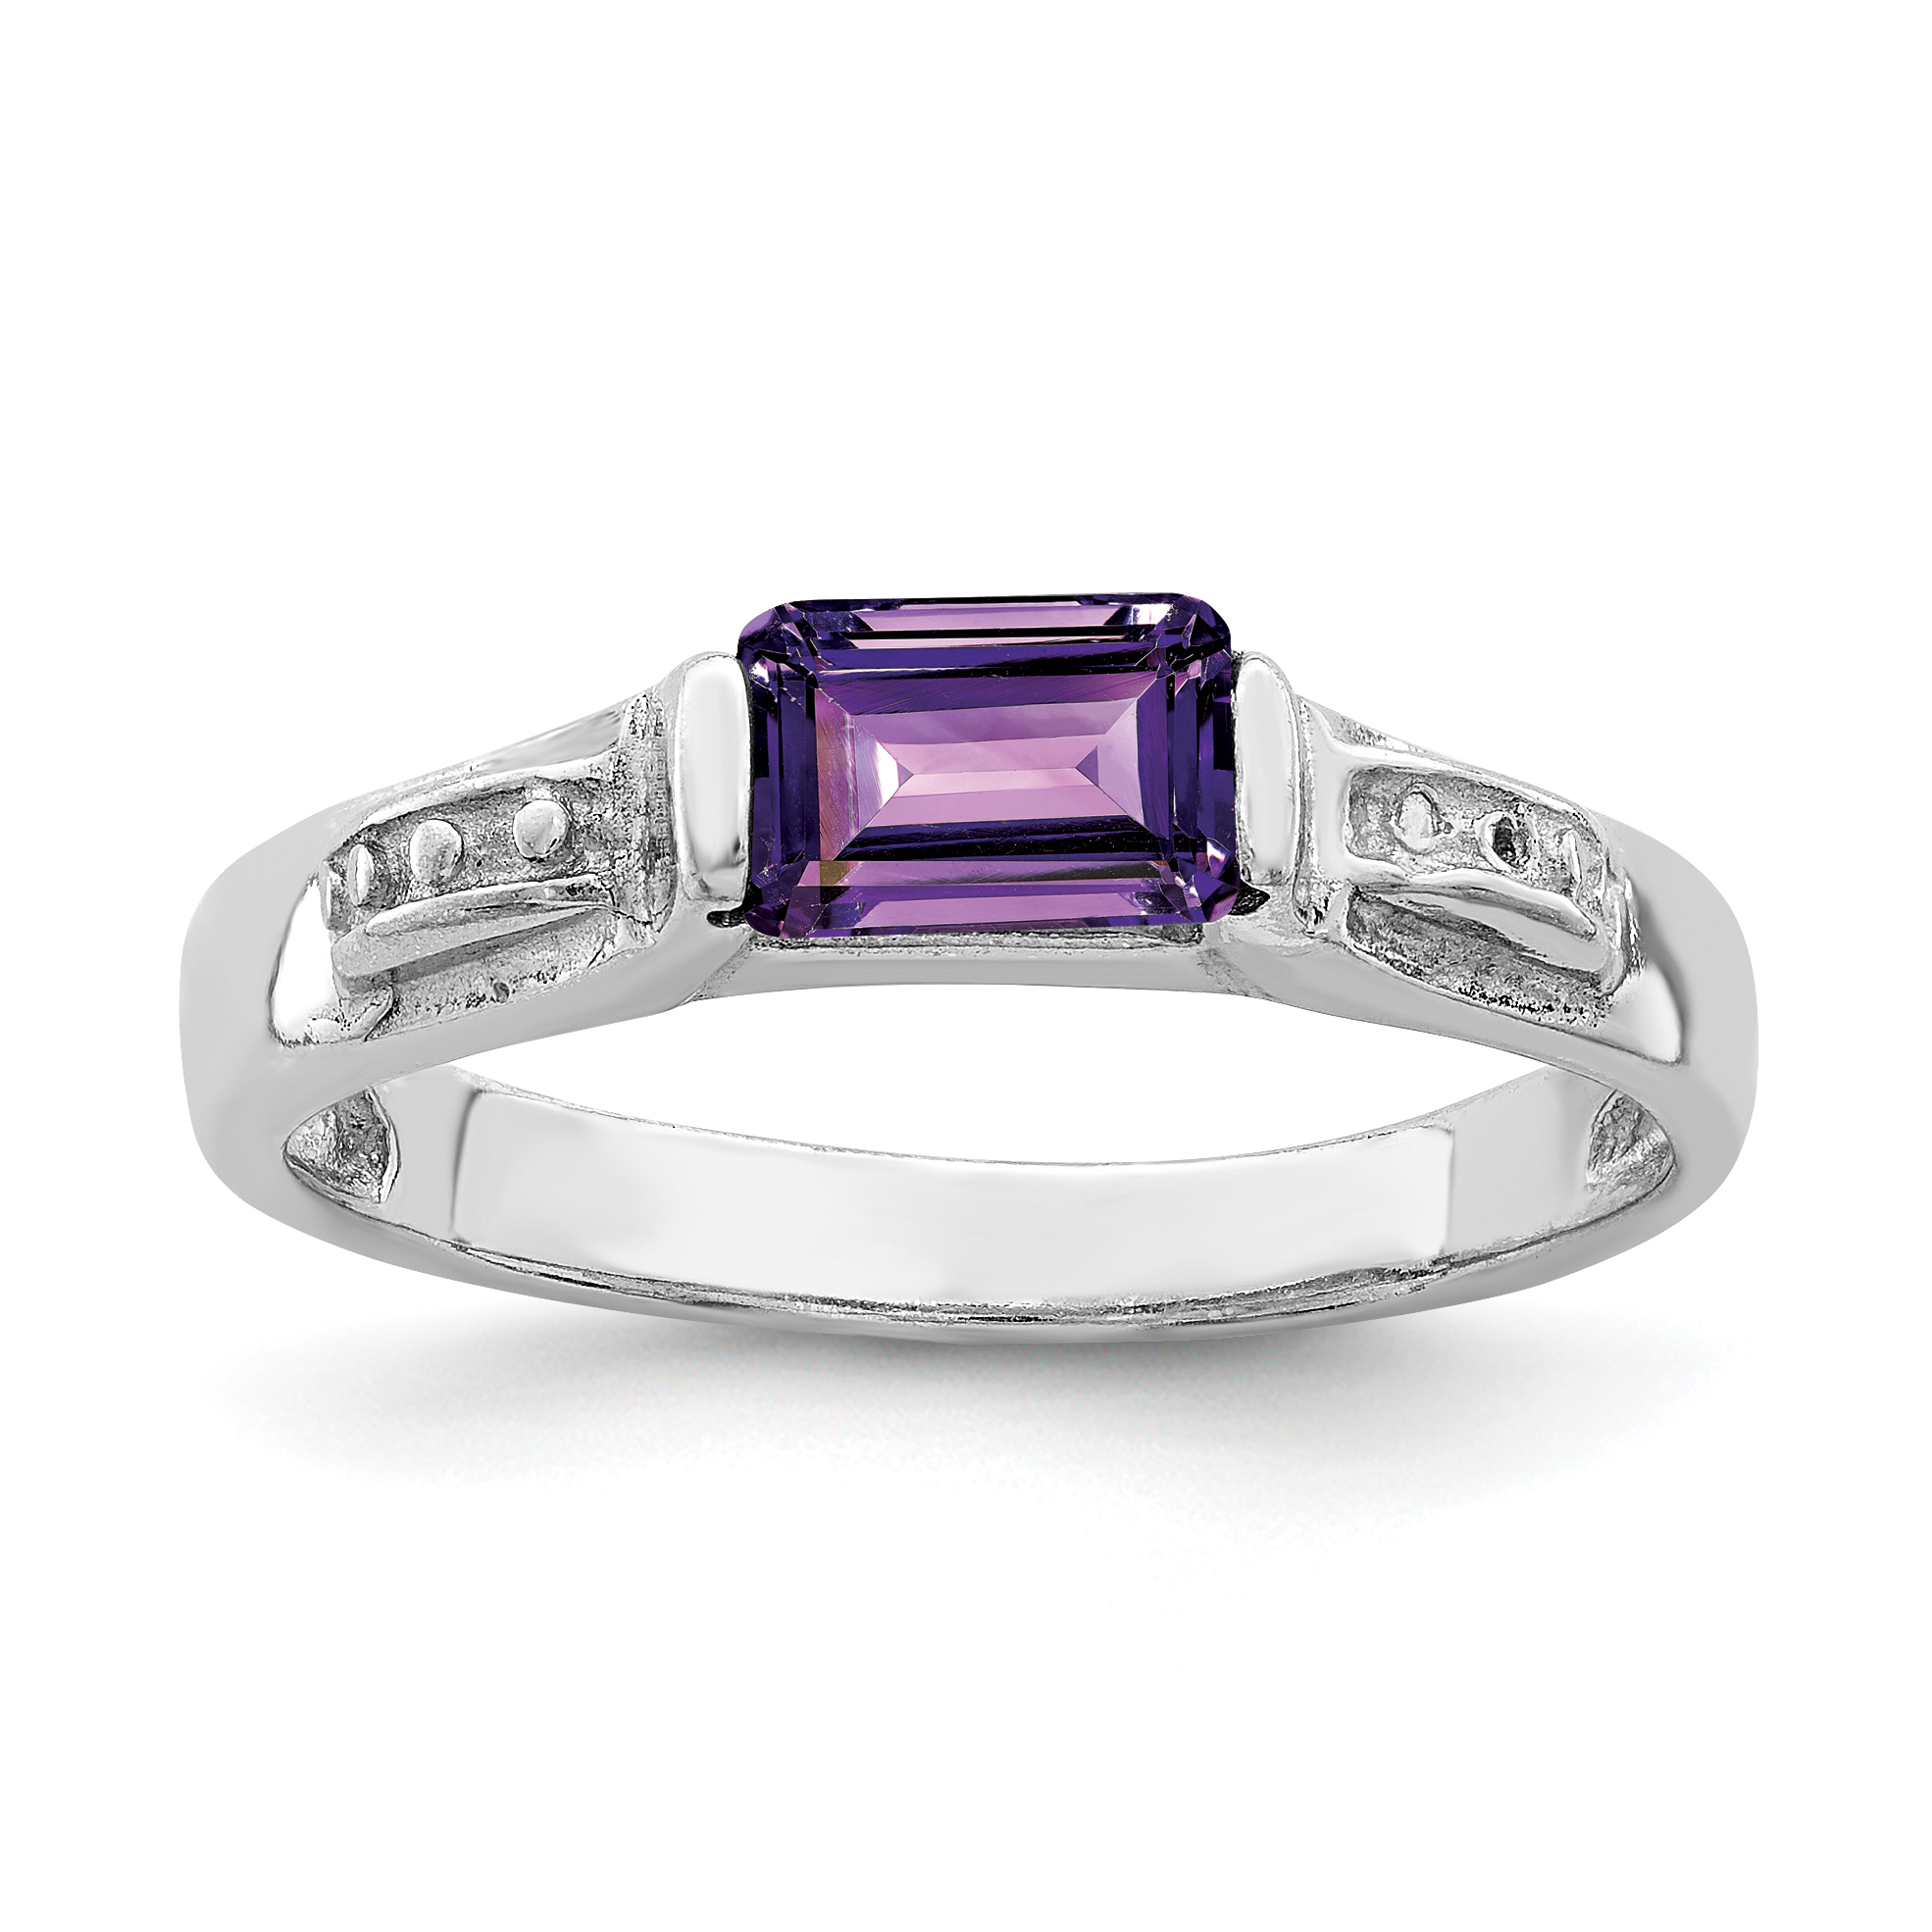 Core Gold Sterling Silver Amethyst Ring